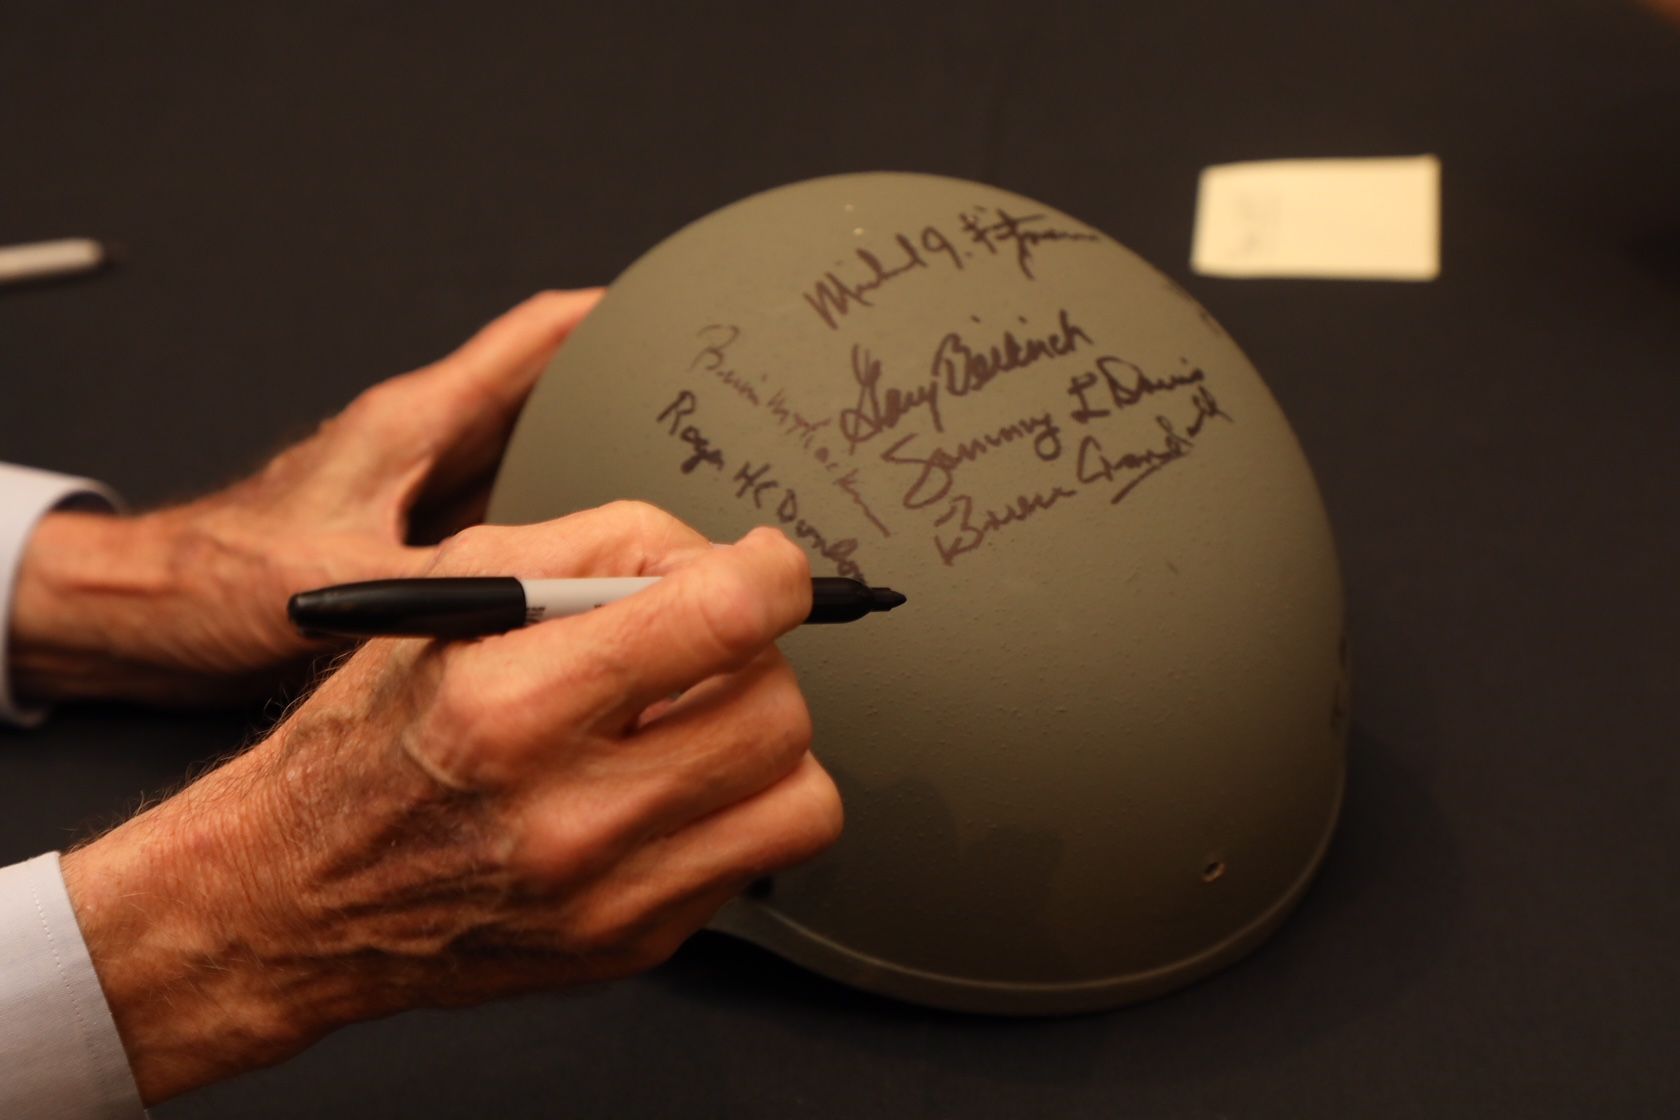 An autographed helmet at the Congressional Medal of Honor Society Convention, which is being held in Annapolis for the first time. (Courtesy Shmulik Almany/Congressional Medal of Honor Society)